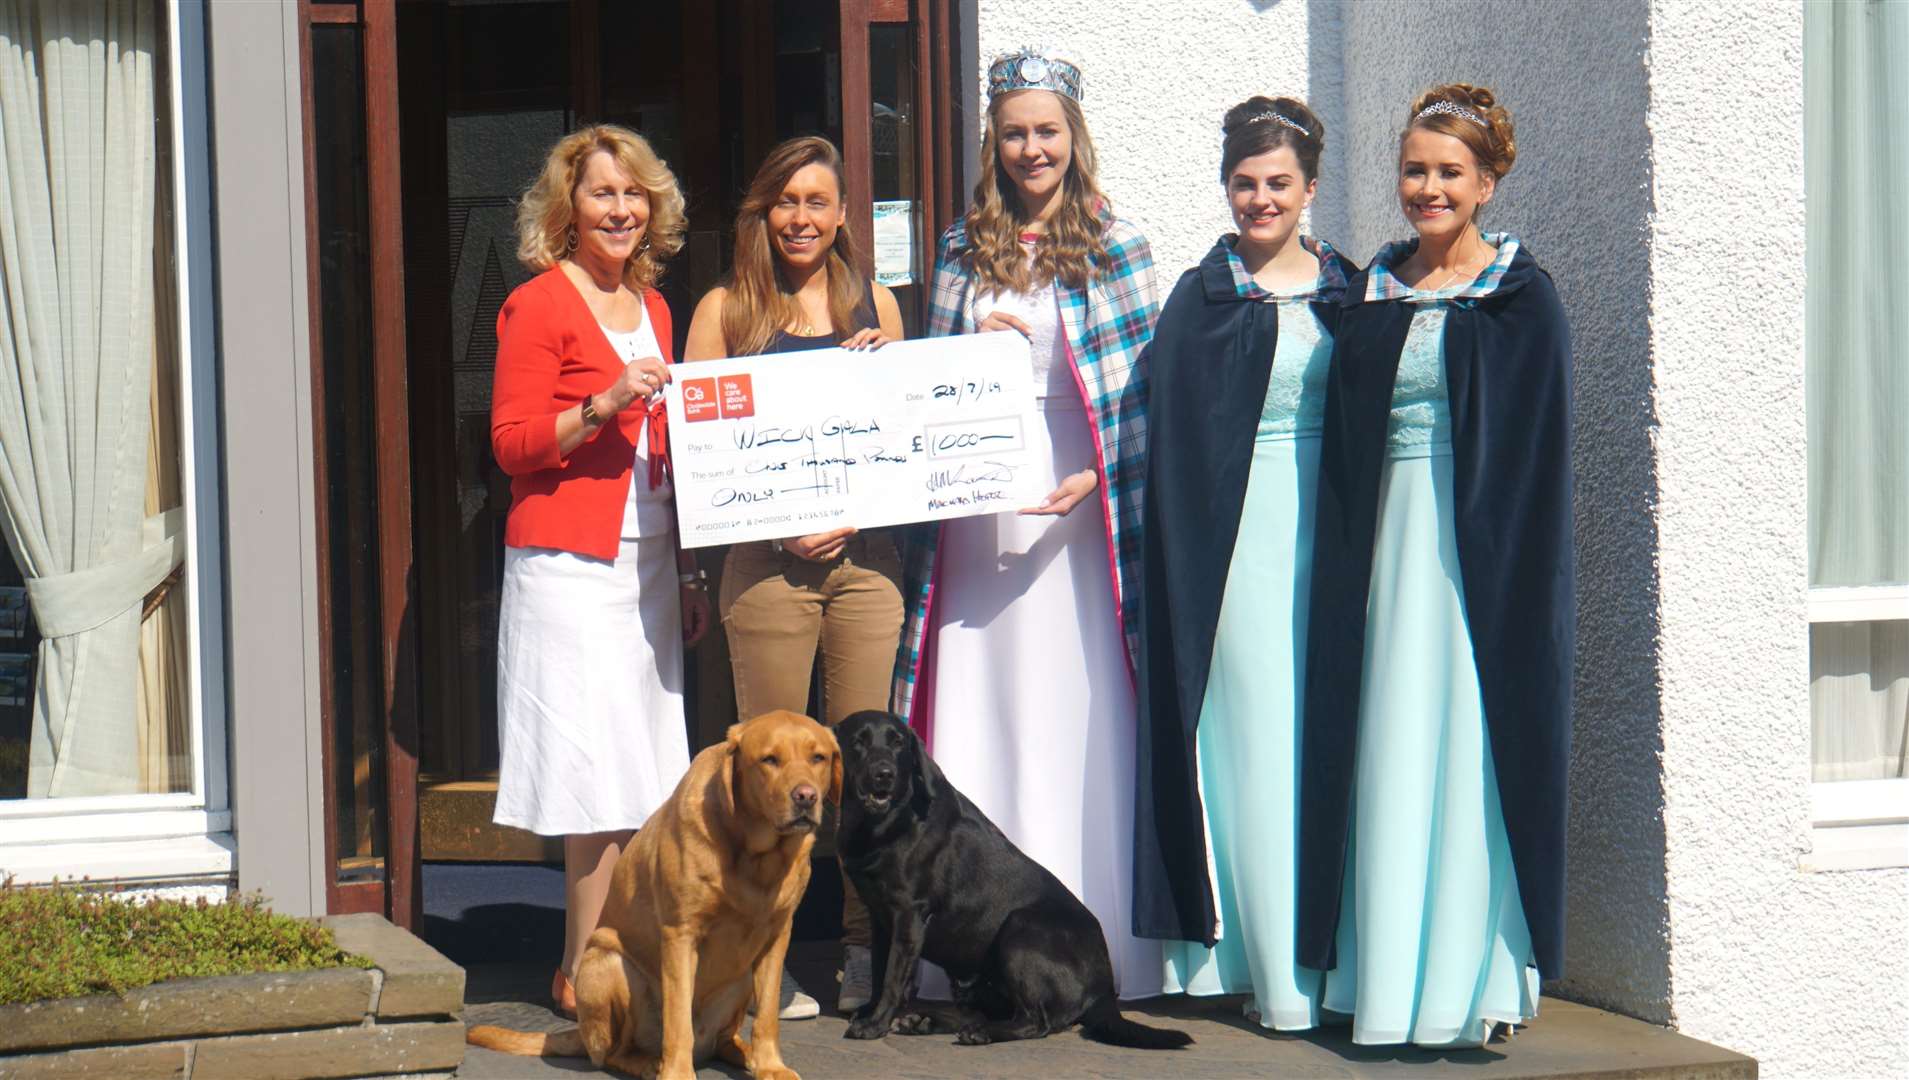 Mackays Hotel presented a cheque for £1000 to Wick Gala Week as a goodwill gesture. From left, Ellie Lamont and her daughter Jennifer Lamont from the hotel, gala queen Maja Pearson, and her attendants Sophie Green and Morven Coghill. Front row are the hotel dogs Max and Breagh. Picture: DGS